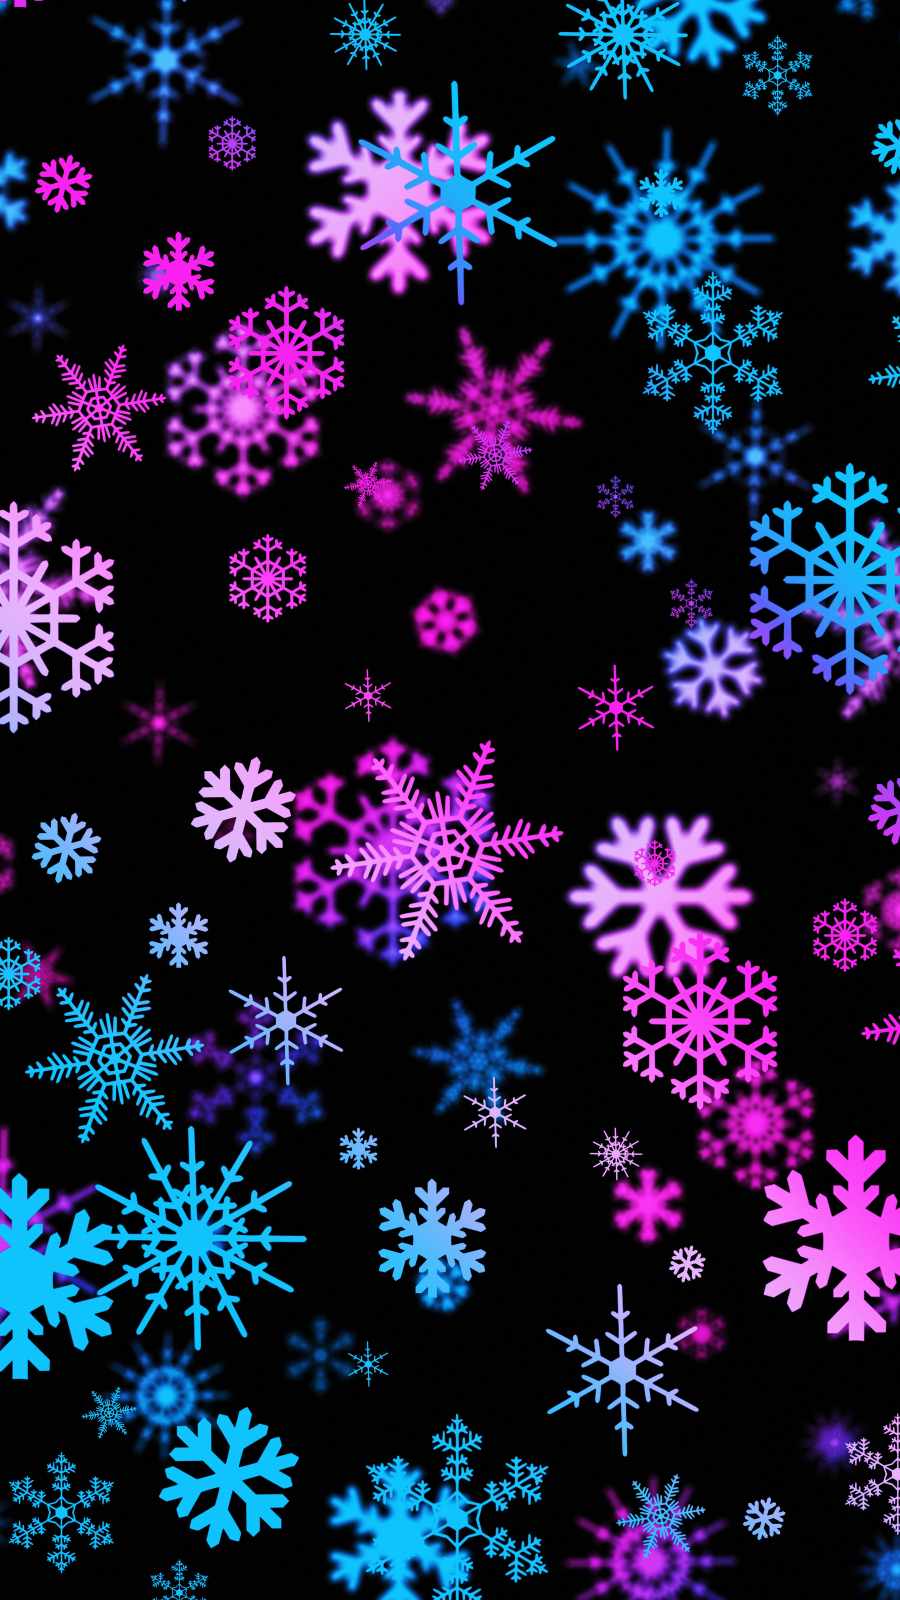 IPhone wallpaper with a colorful snowflake pattern. - Snowflake